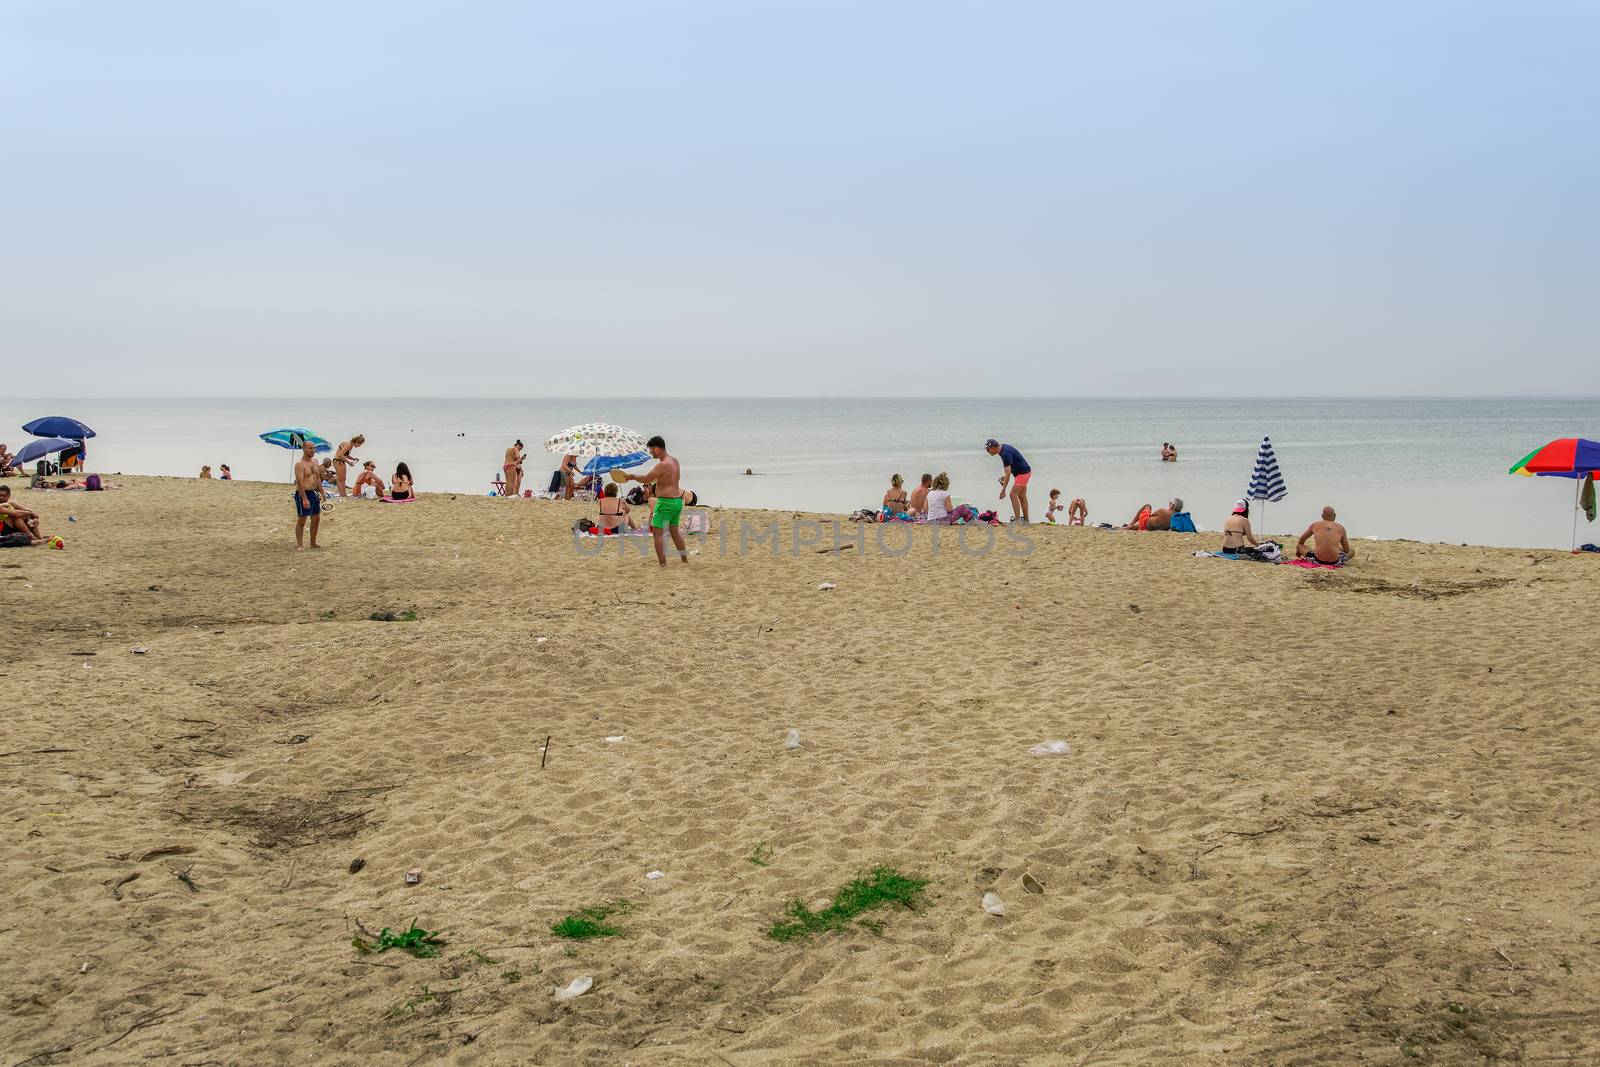 Bathers with sun umbrellas on sand by the sea at Thessaloniki suburbs, after government suggests people keep a distance.